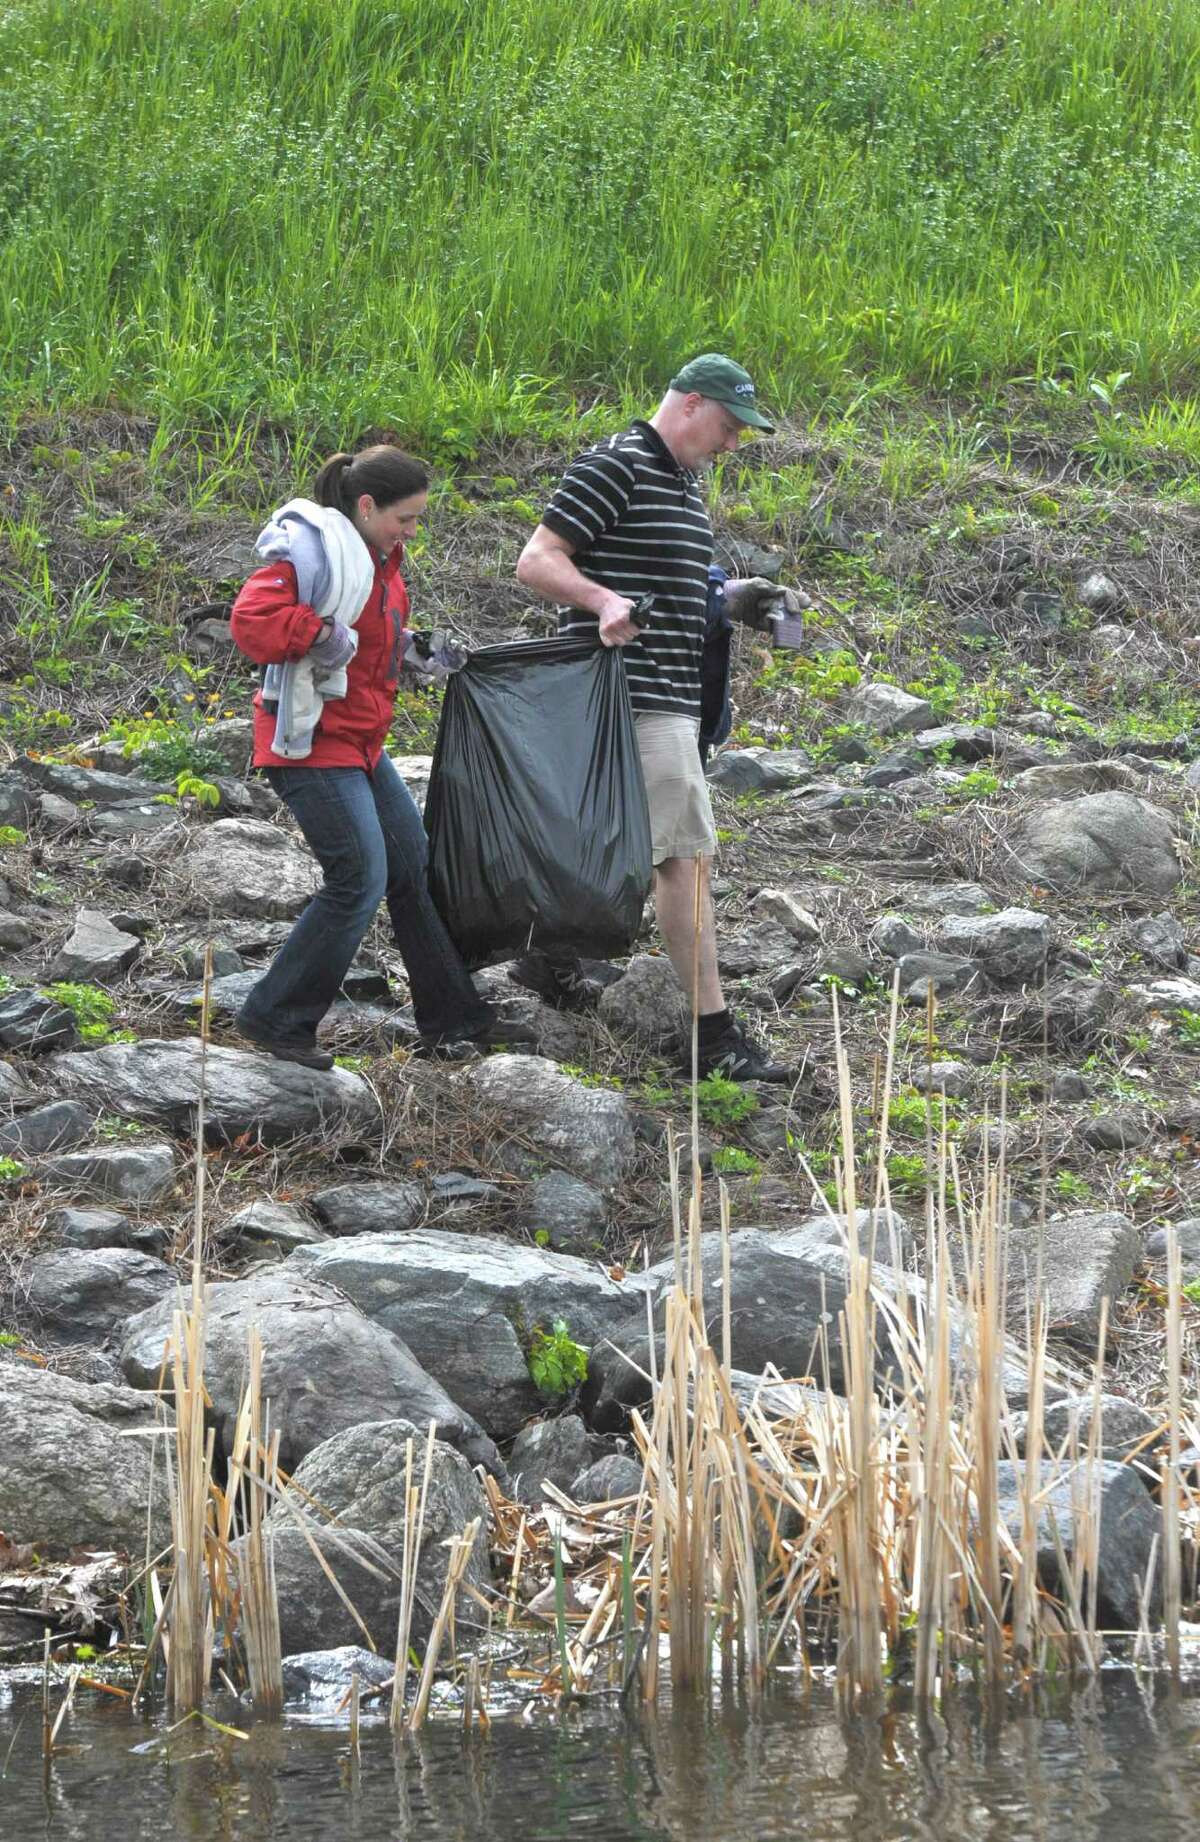 Nicole Gurney, a teacher with Project CLEAR, and Philip Pacchiana, of Danbury, carry a bag full of trash along the shore near Danbury Town Park during the 15th Annual John Marsicano Memorial Lake Cleanup, on Saturday, May 16, 2015, in Danbury, Conn, on Candlewood Lake.